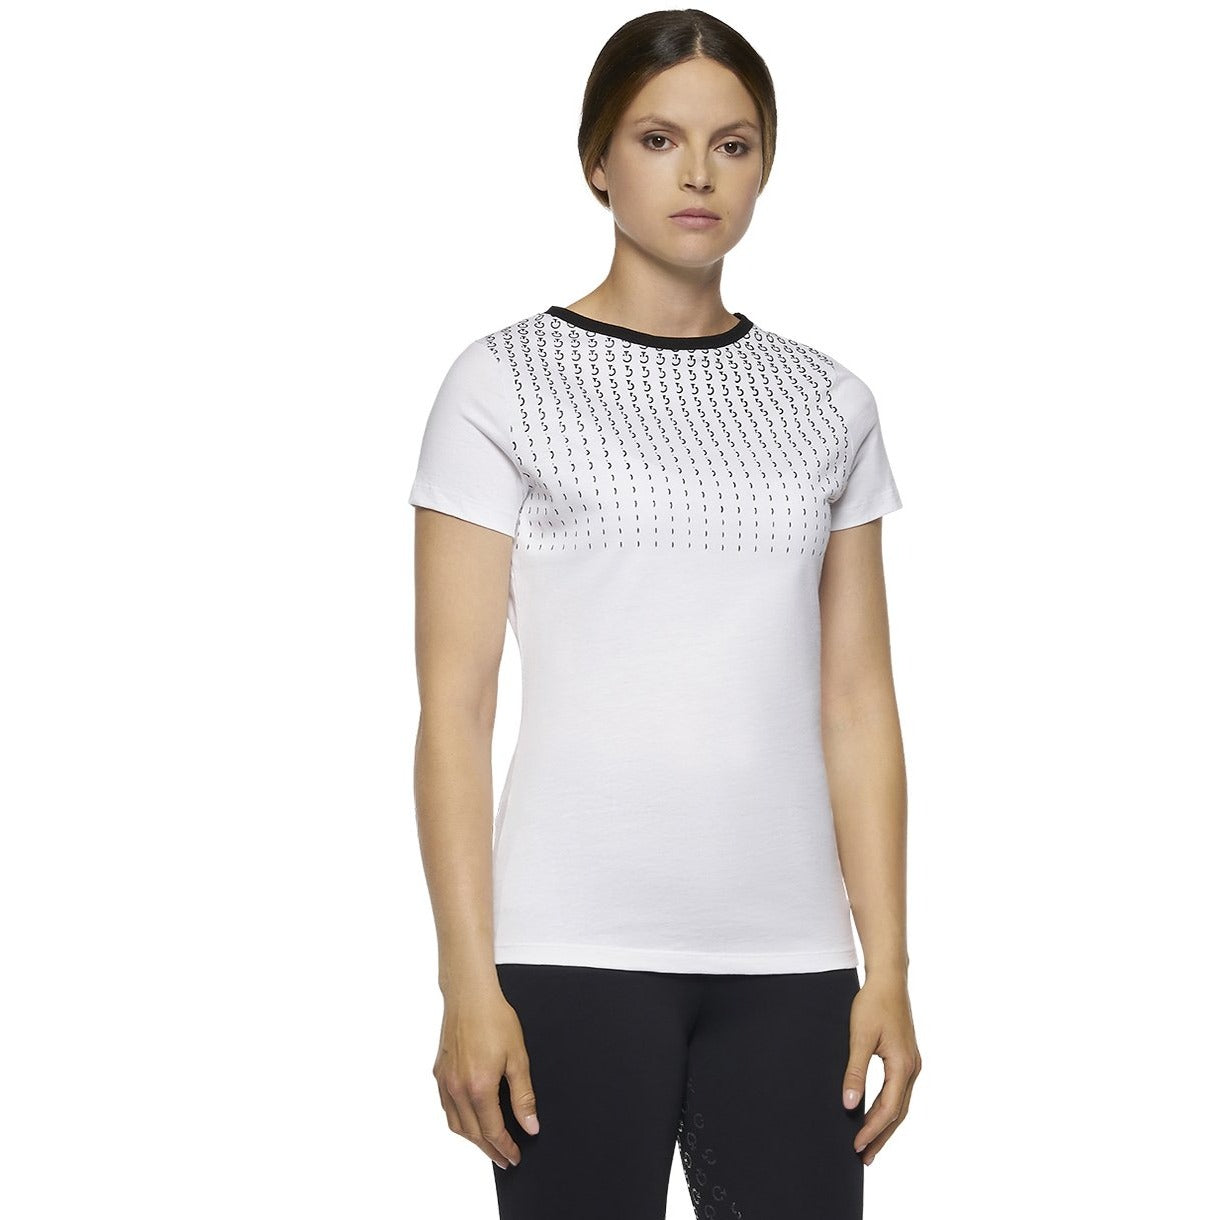 Cavalleria Toscana CT Phase-Out T-Shirt-Trailrace Equestrian Outfitters-The Equestrian